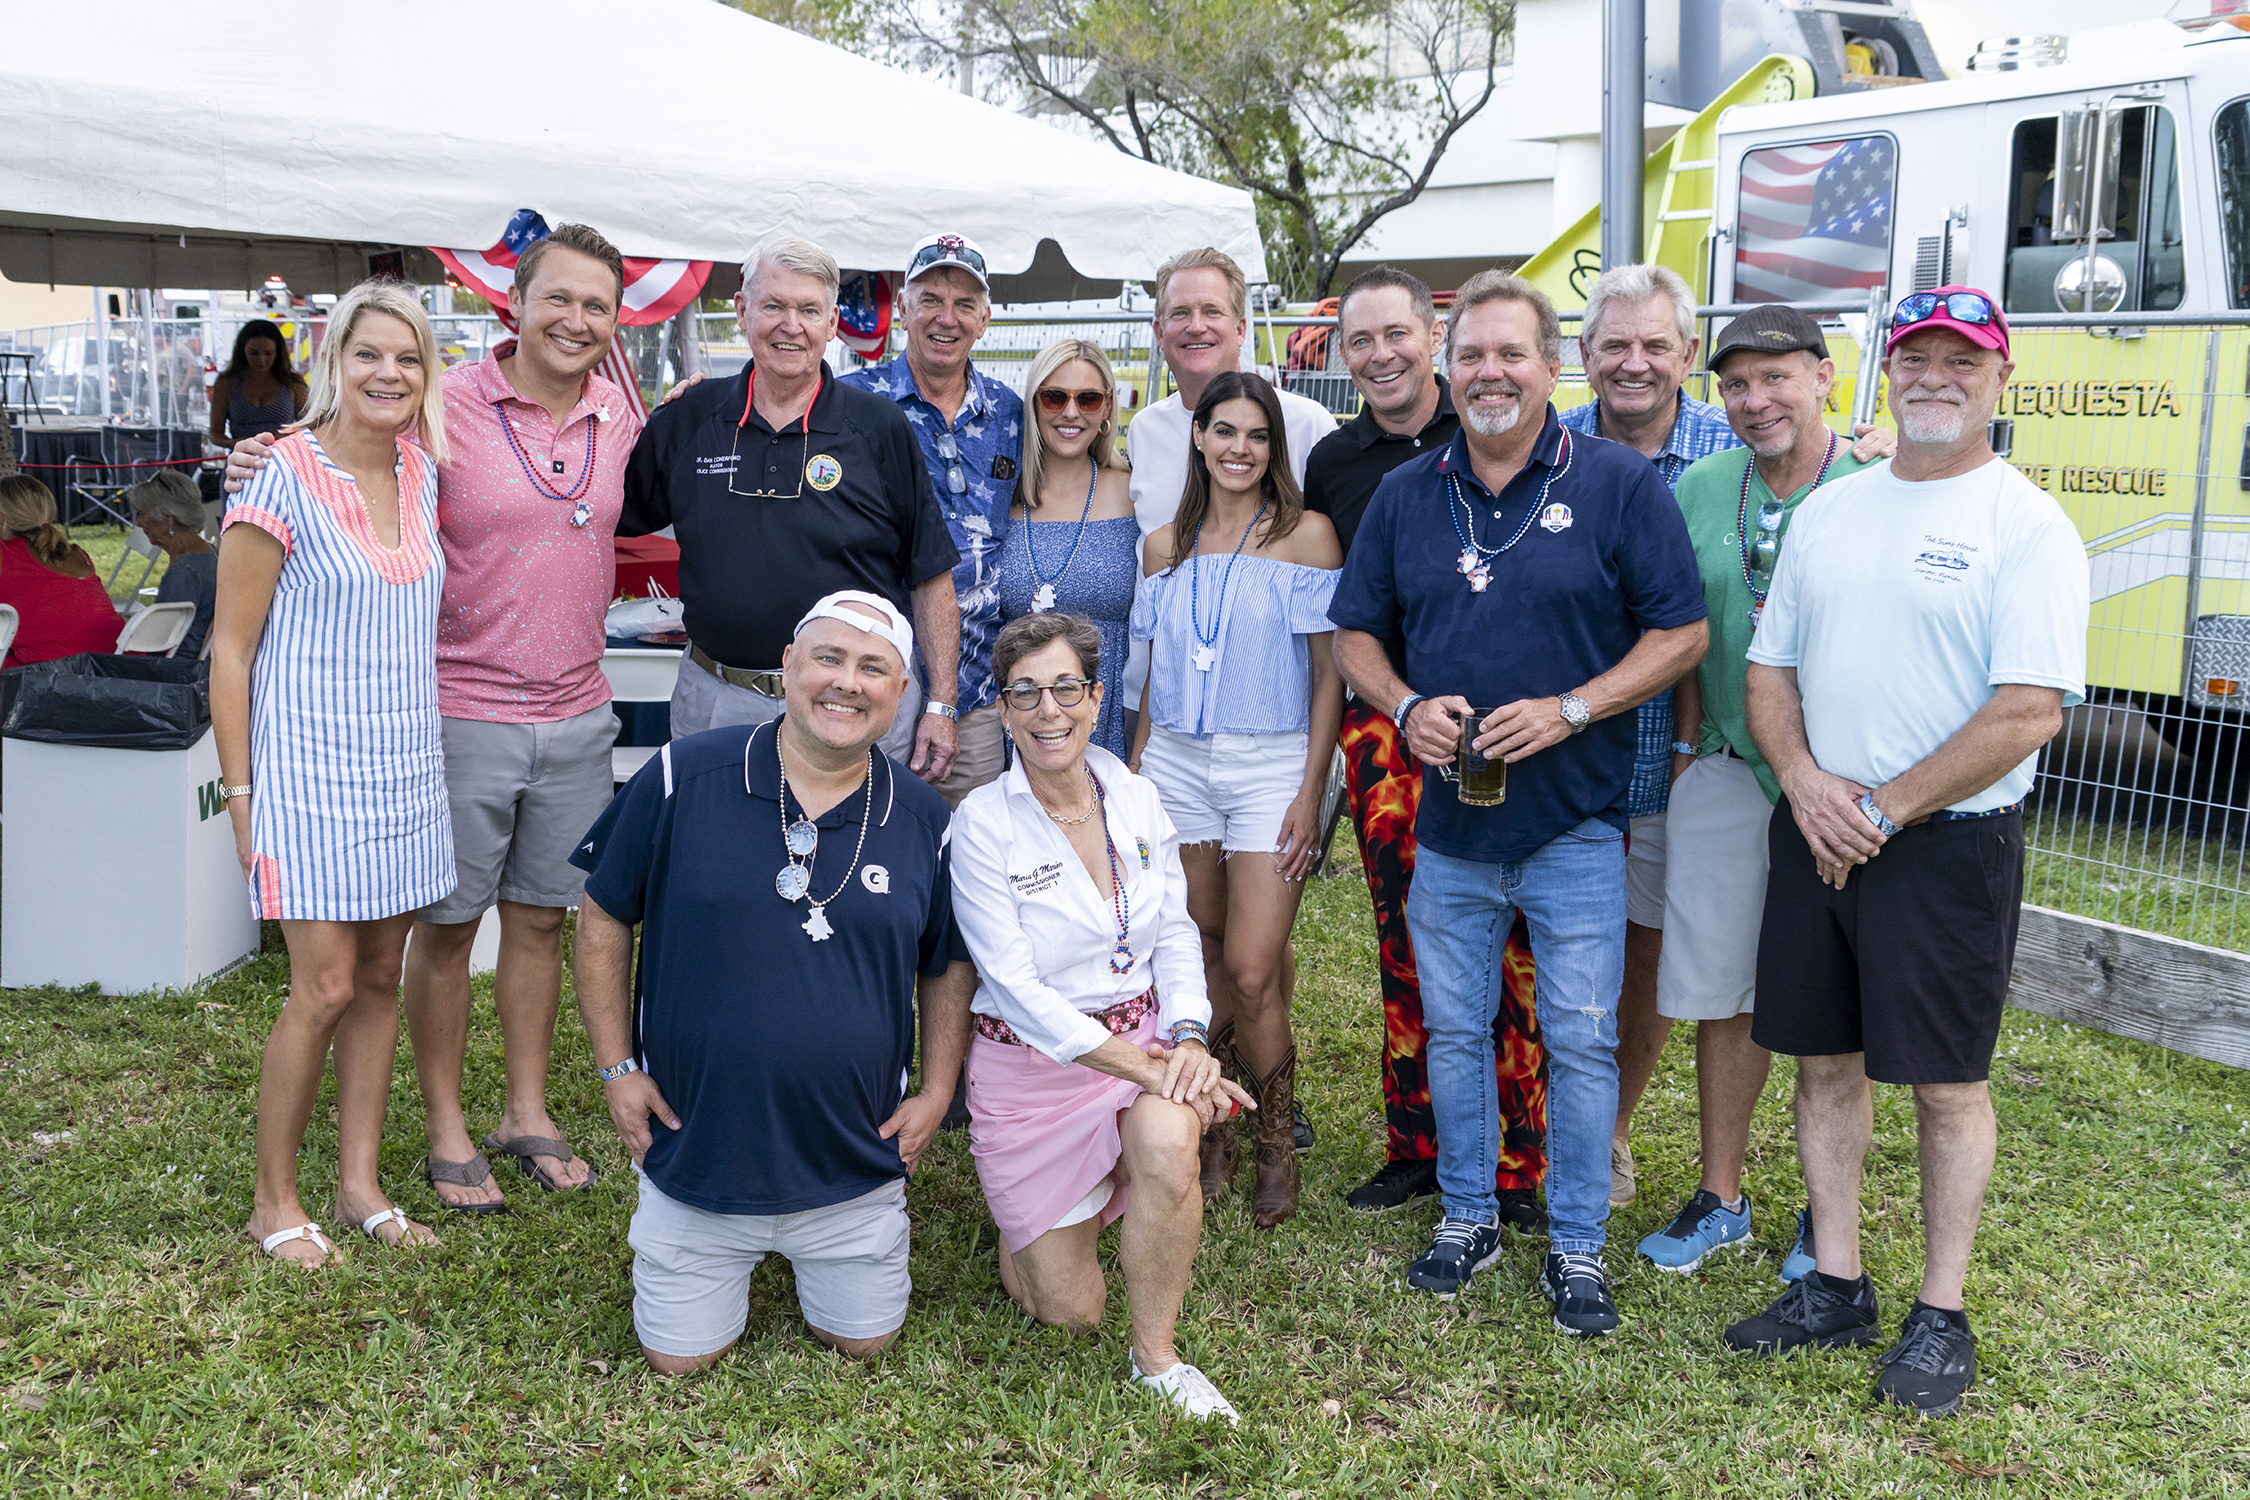 http://pbcauthor/SiteImages/Newsroom/1122/Tequesta-Chili-CookOff(2)-d1.jpg